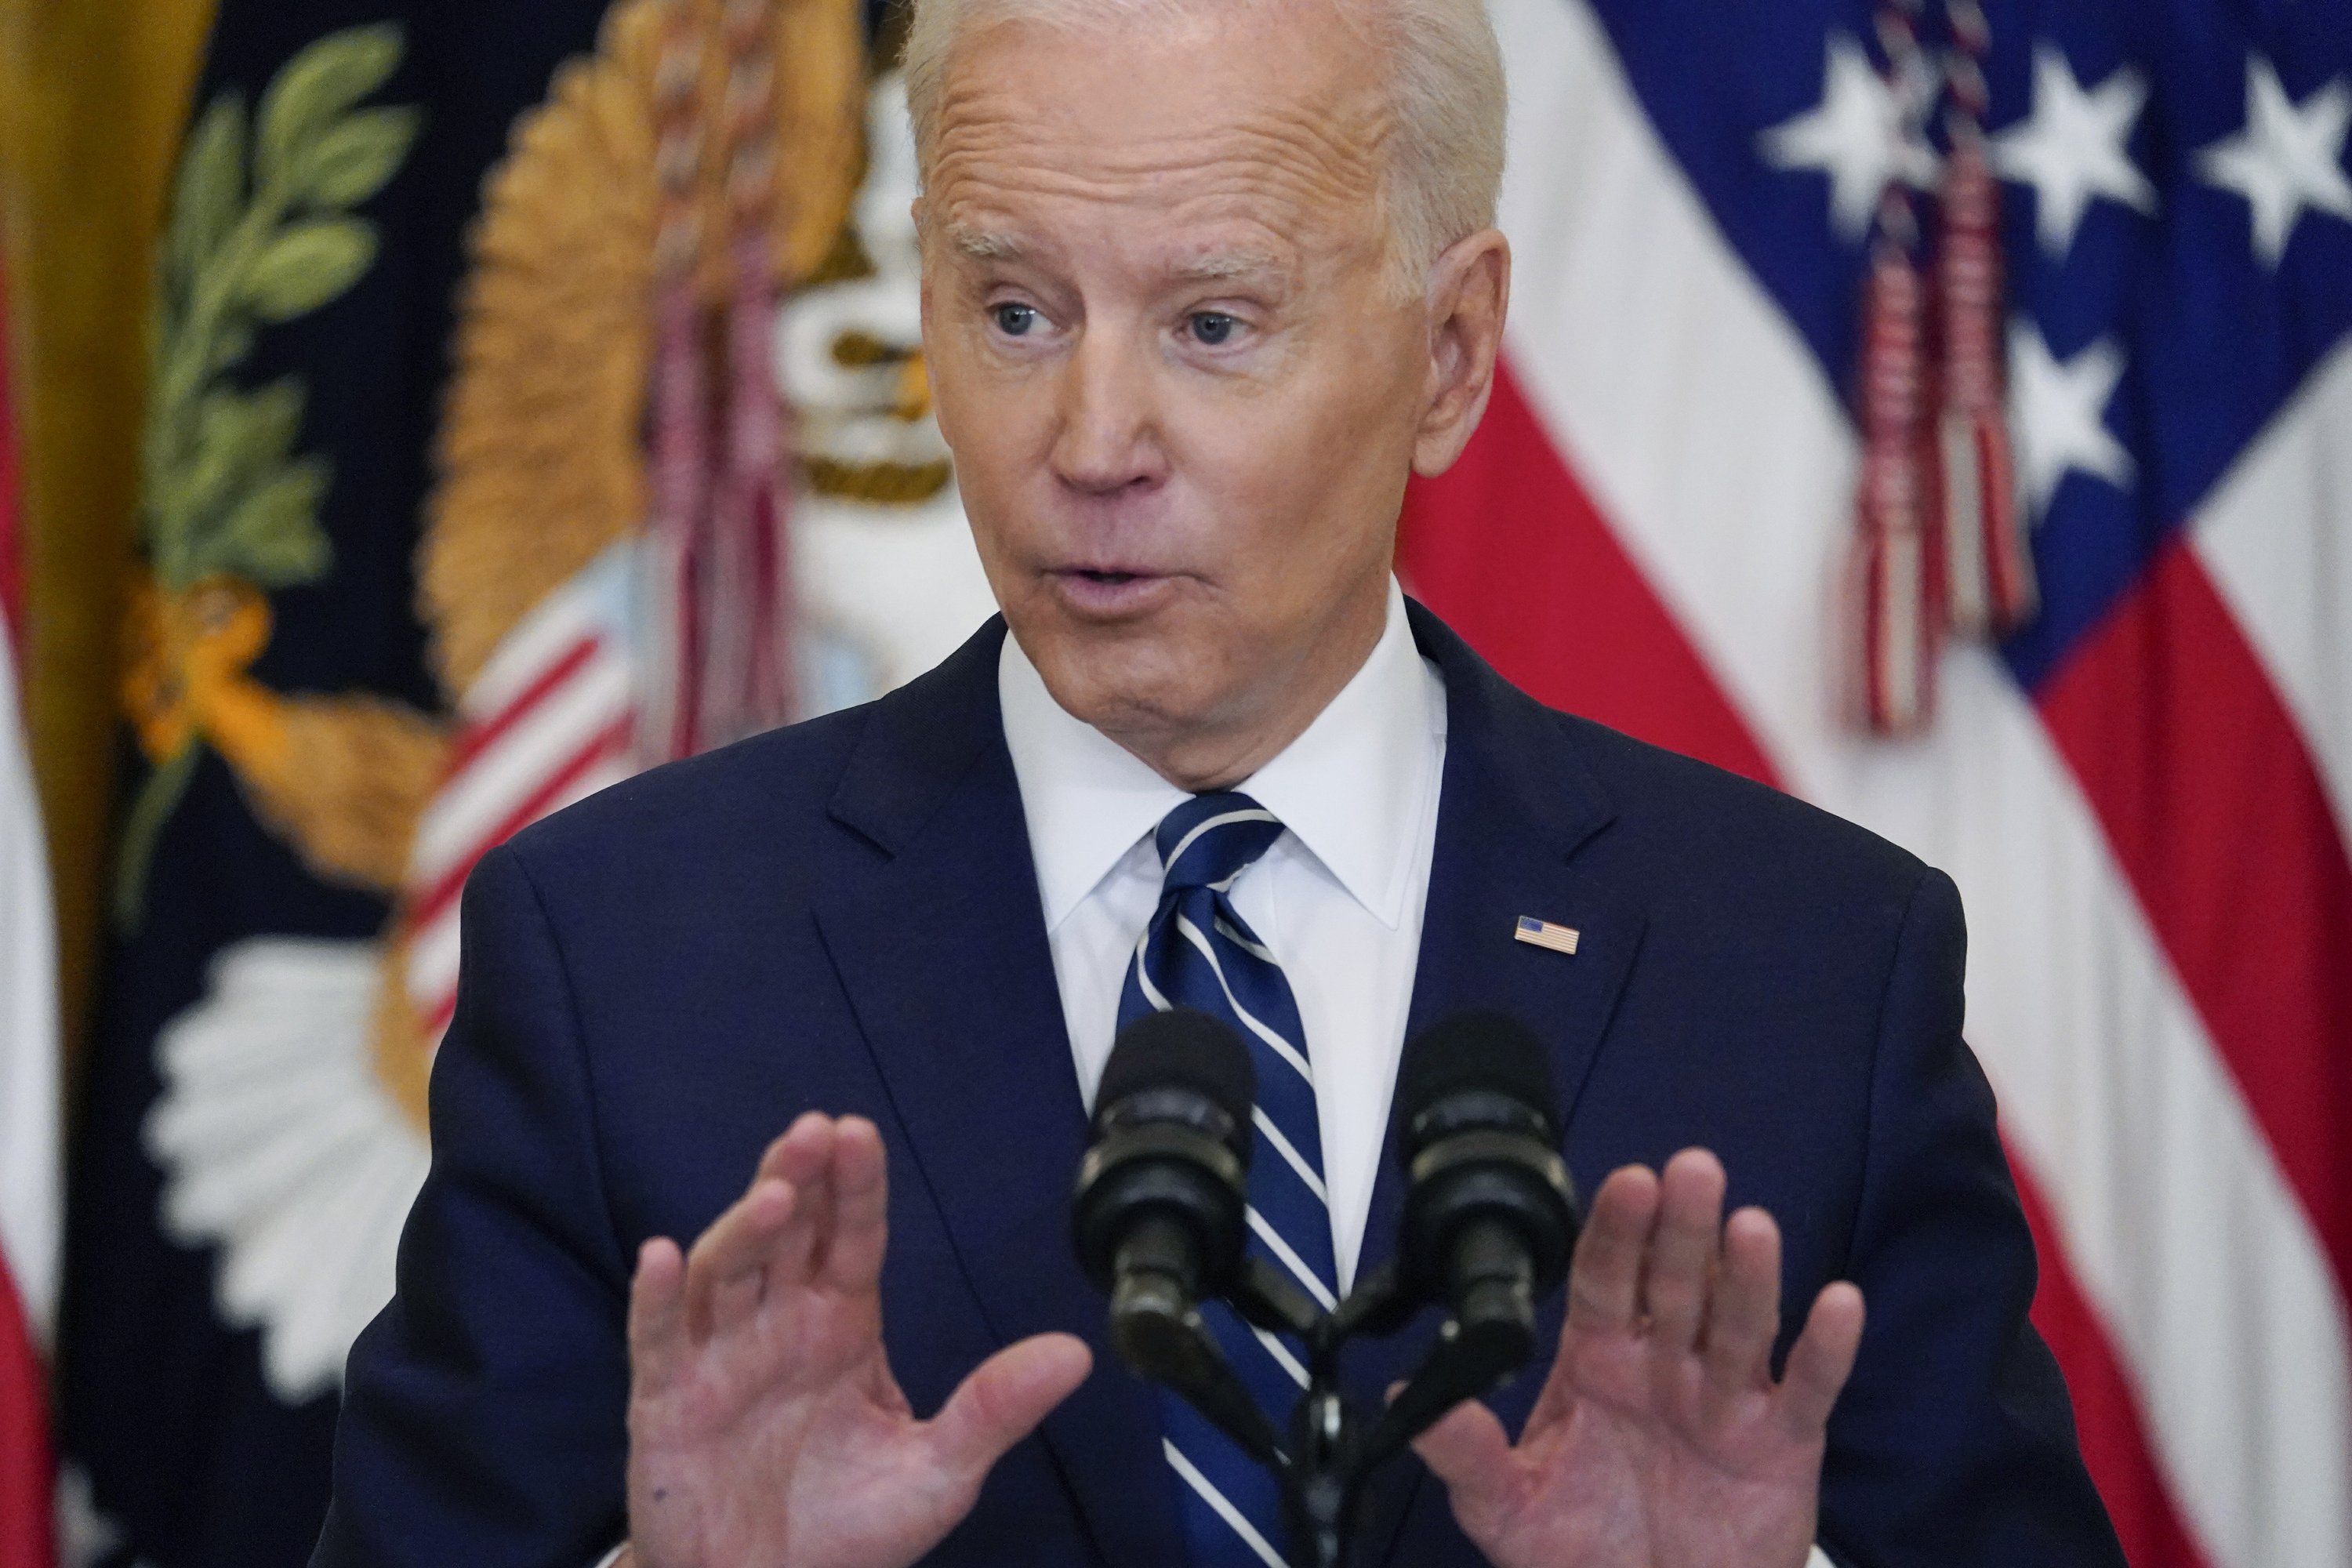 Biden invites Russia and China to first global climate talks